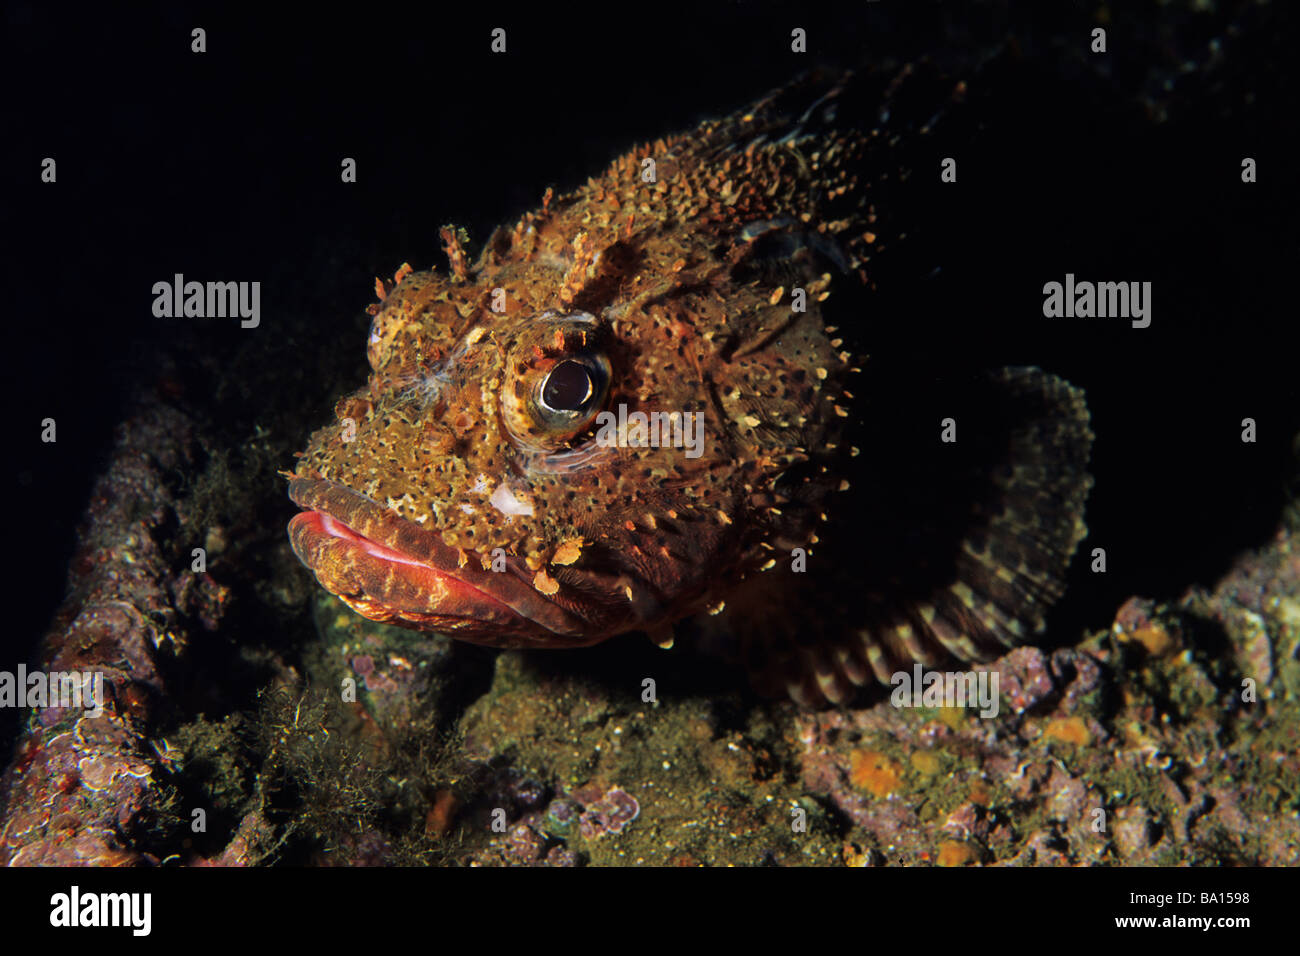 California scorpion fish (Scorpaena guttata) on an artificial reef created by a sunken ship in the California Channel Islands. Stock Photo